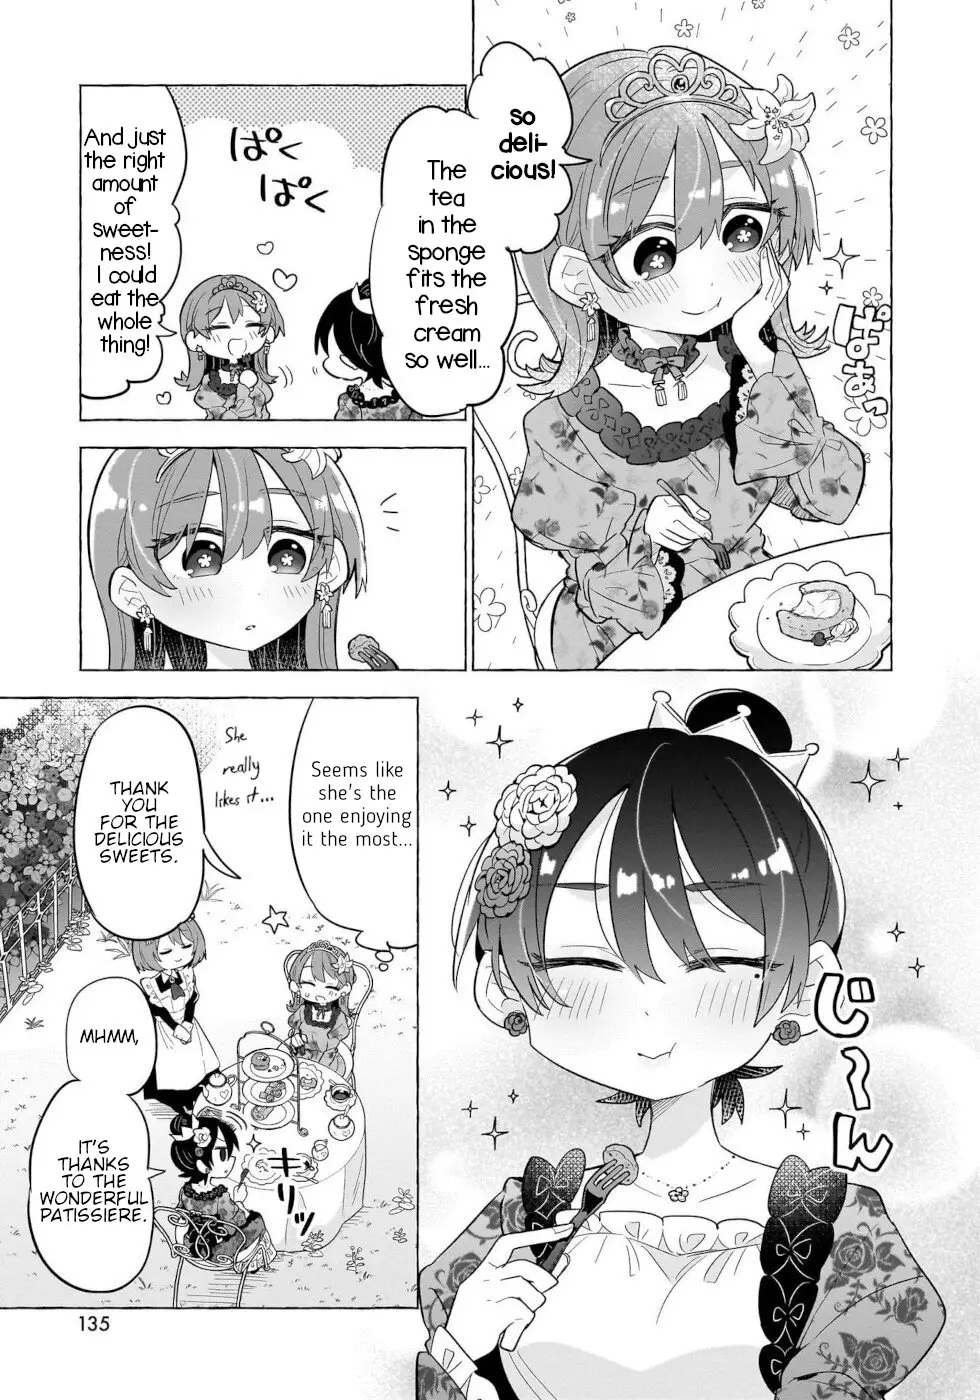 Sweets, Elf, And A High School Girl - 5 page 21-477a2844